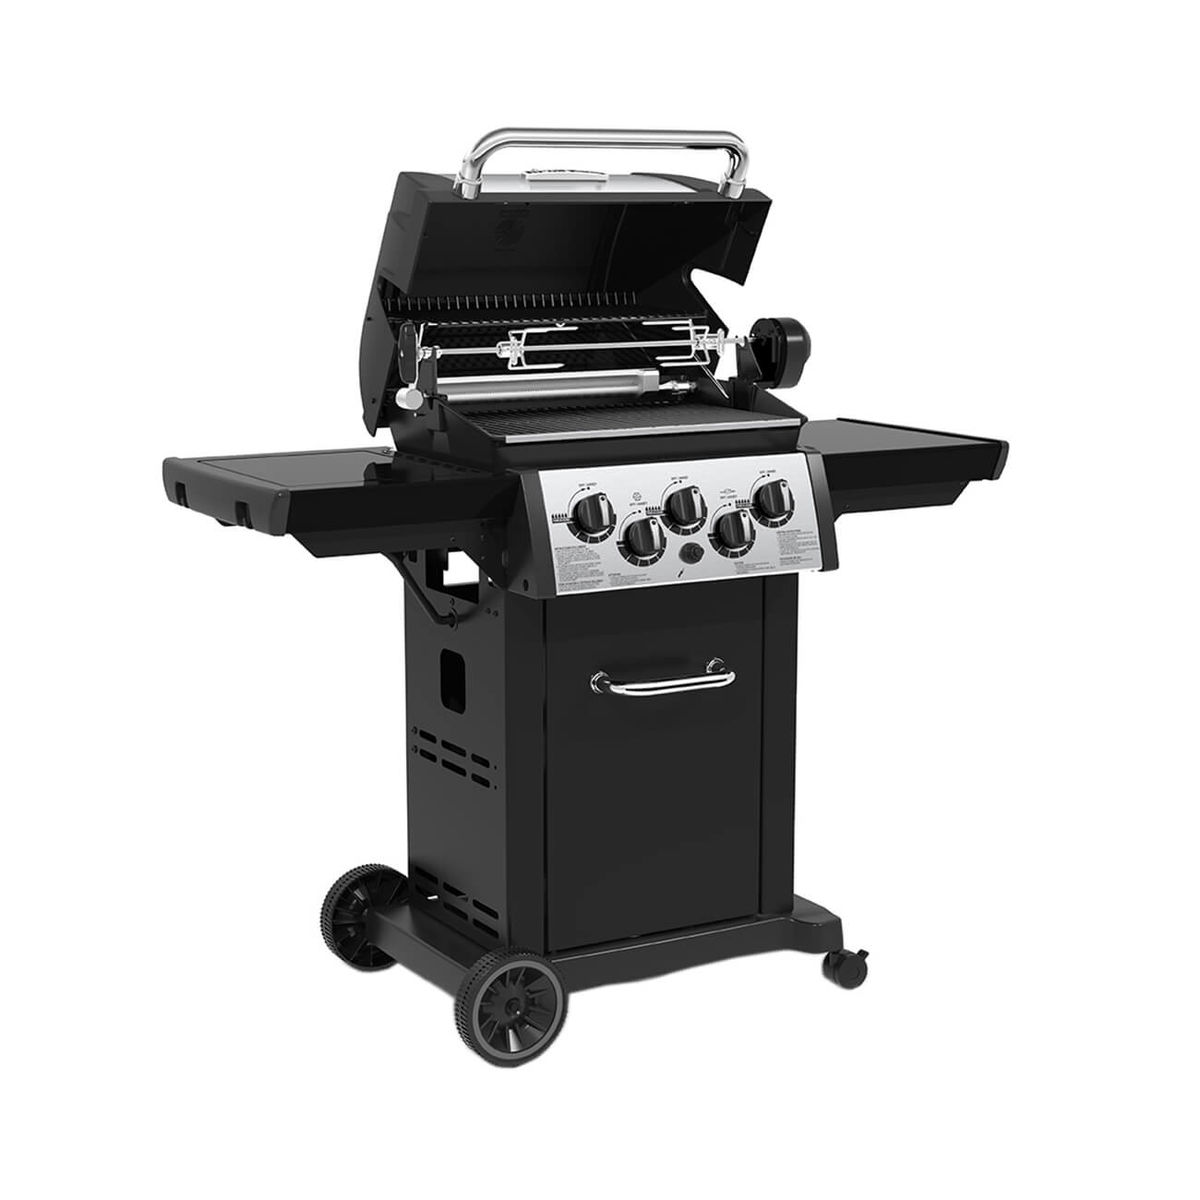 Image of Broil King Monarch 390 Grill bei nettoshop.ch